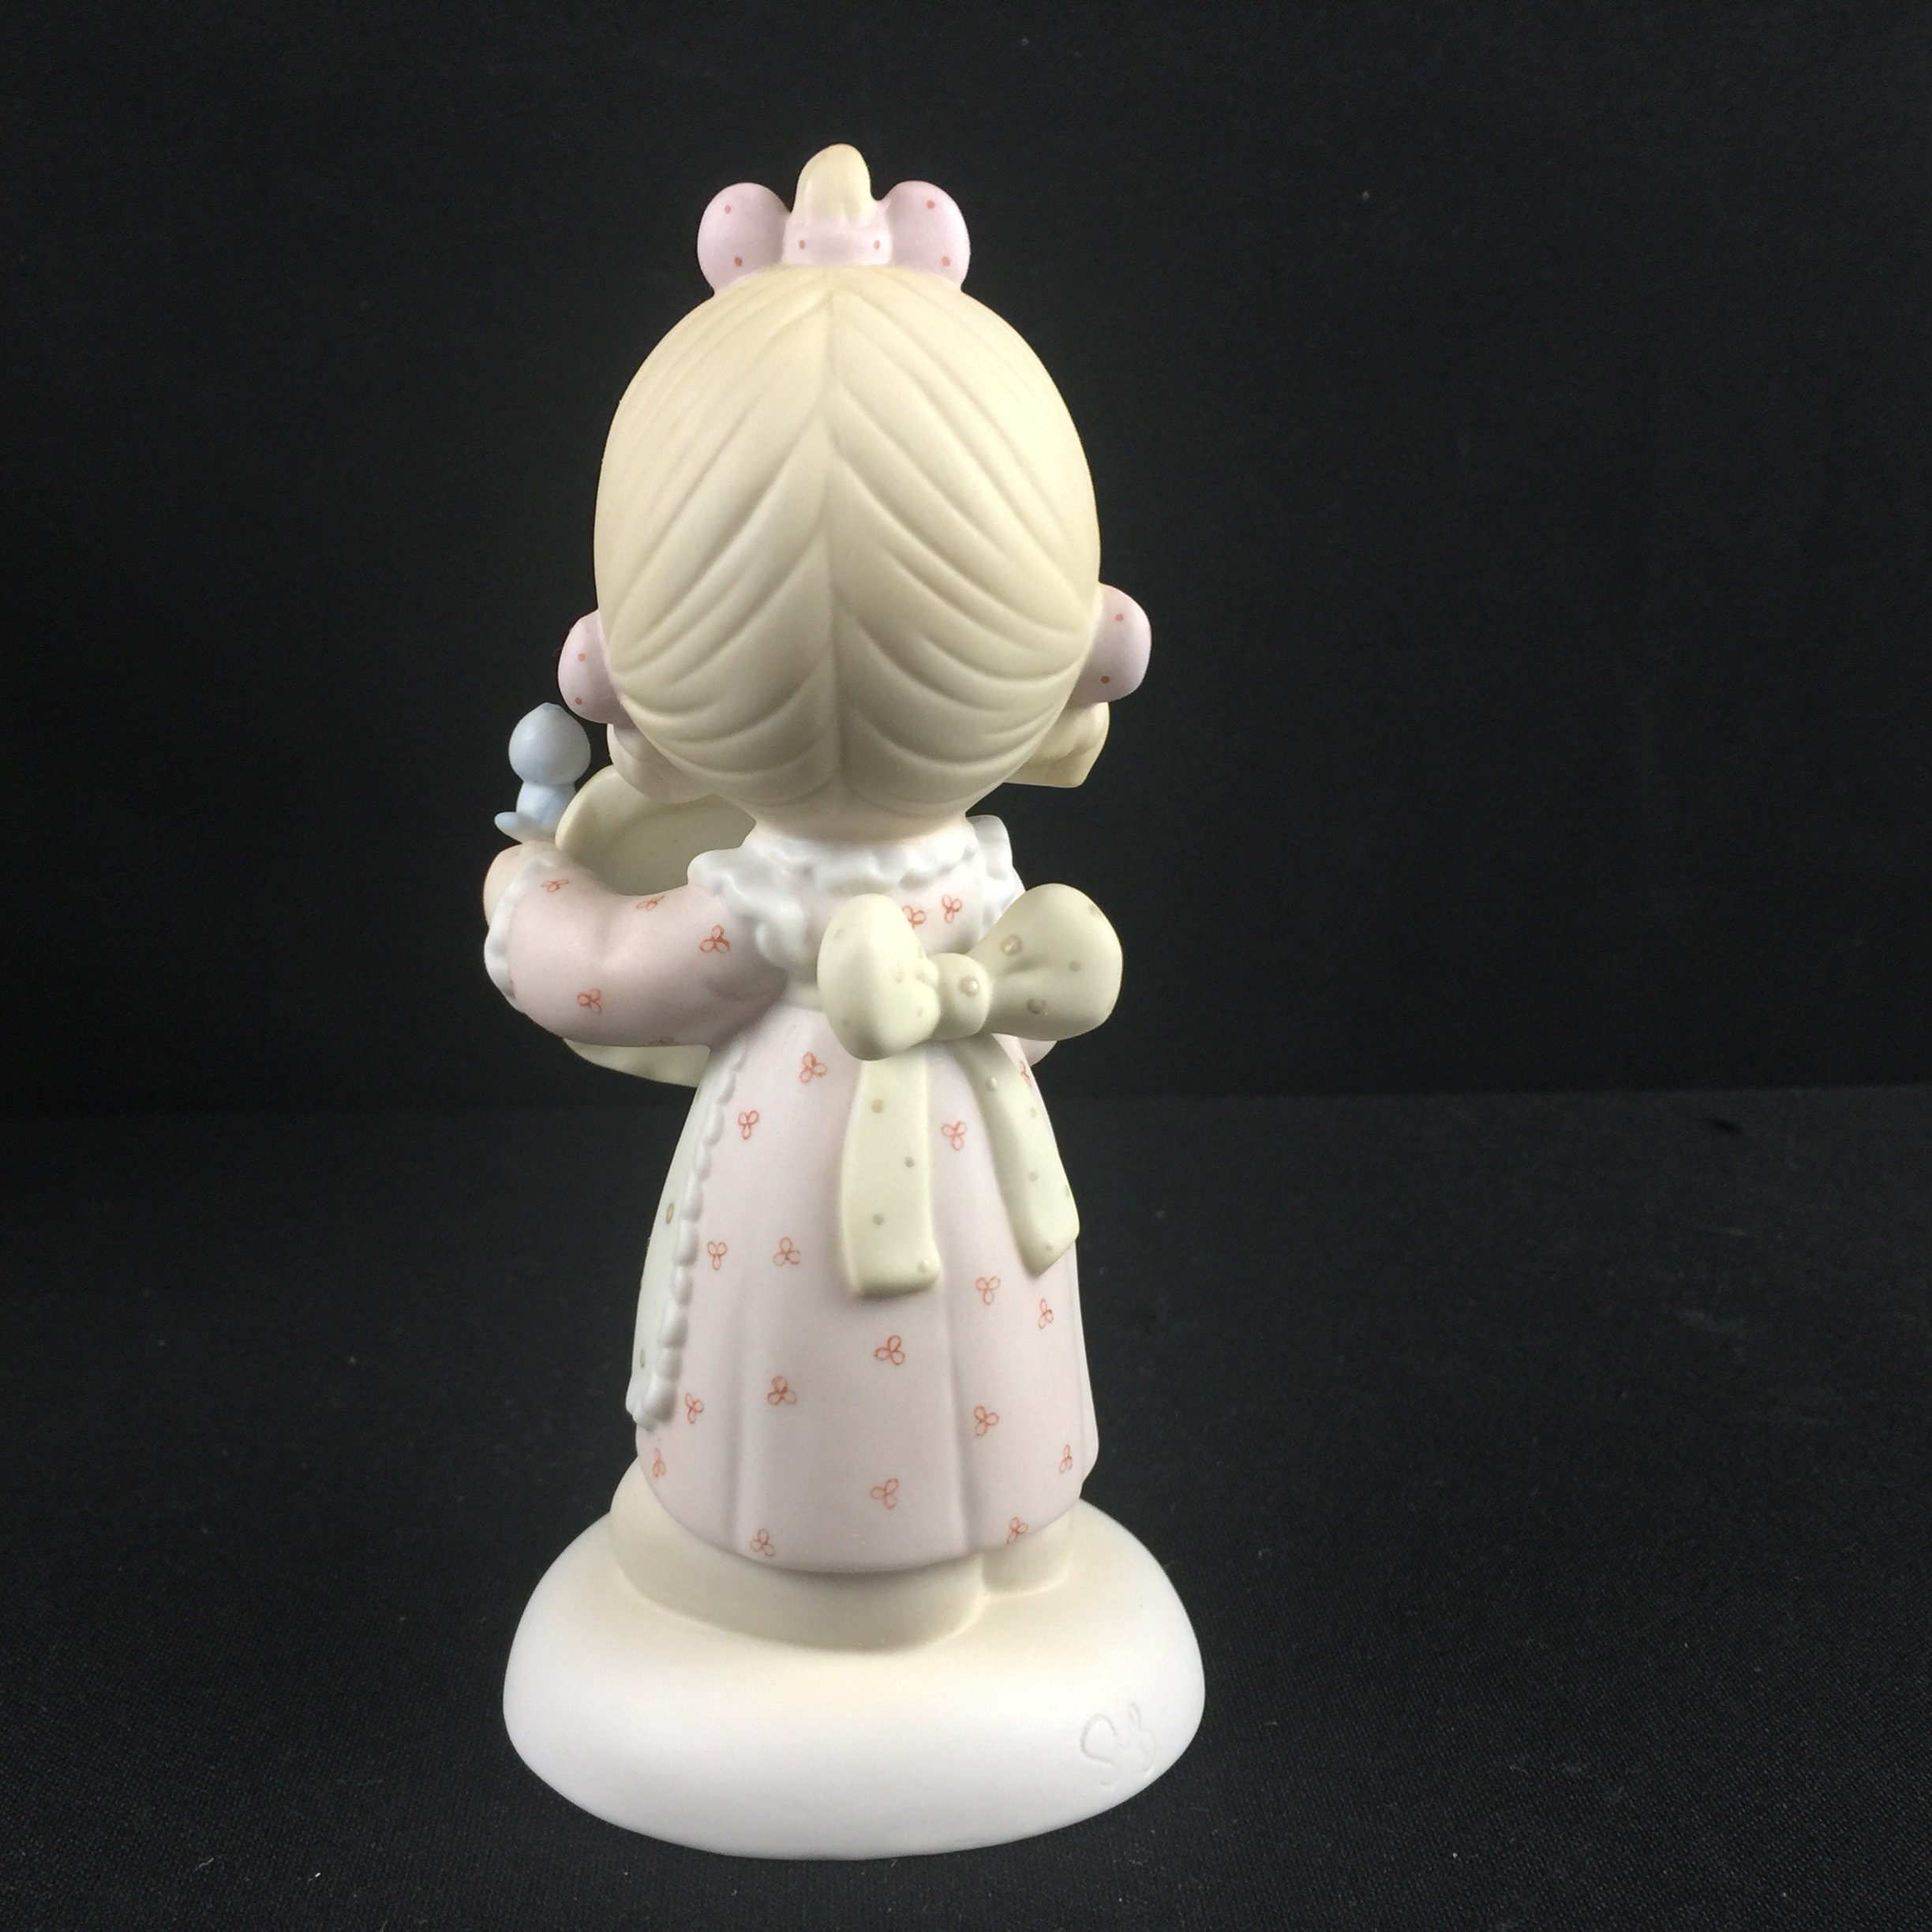 Vintage NEW in Box 1986 Precious Moments Figurine by Enesco - Etsy